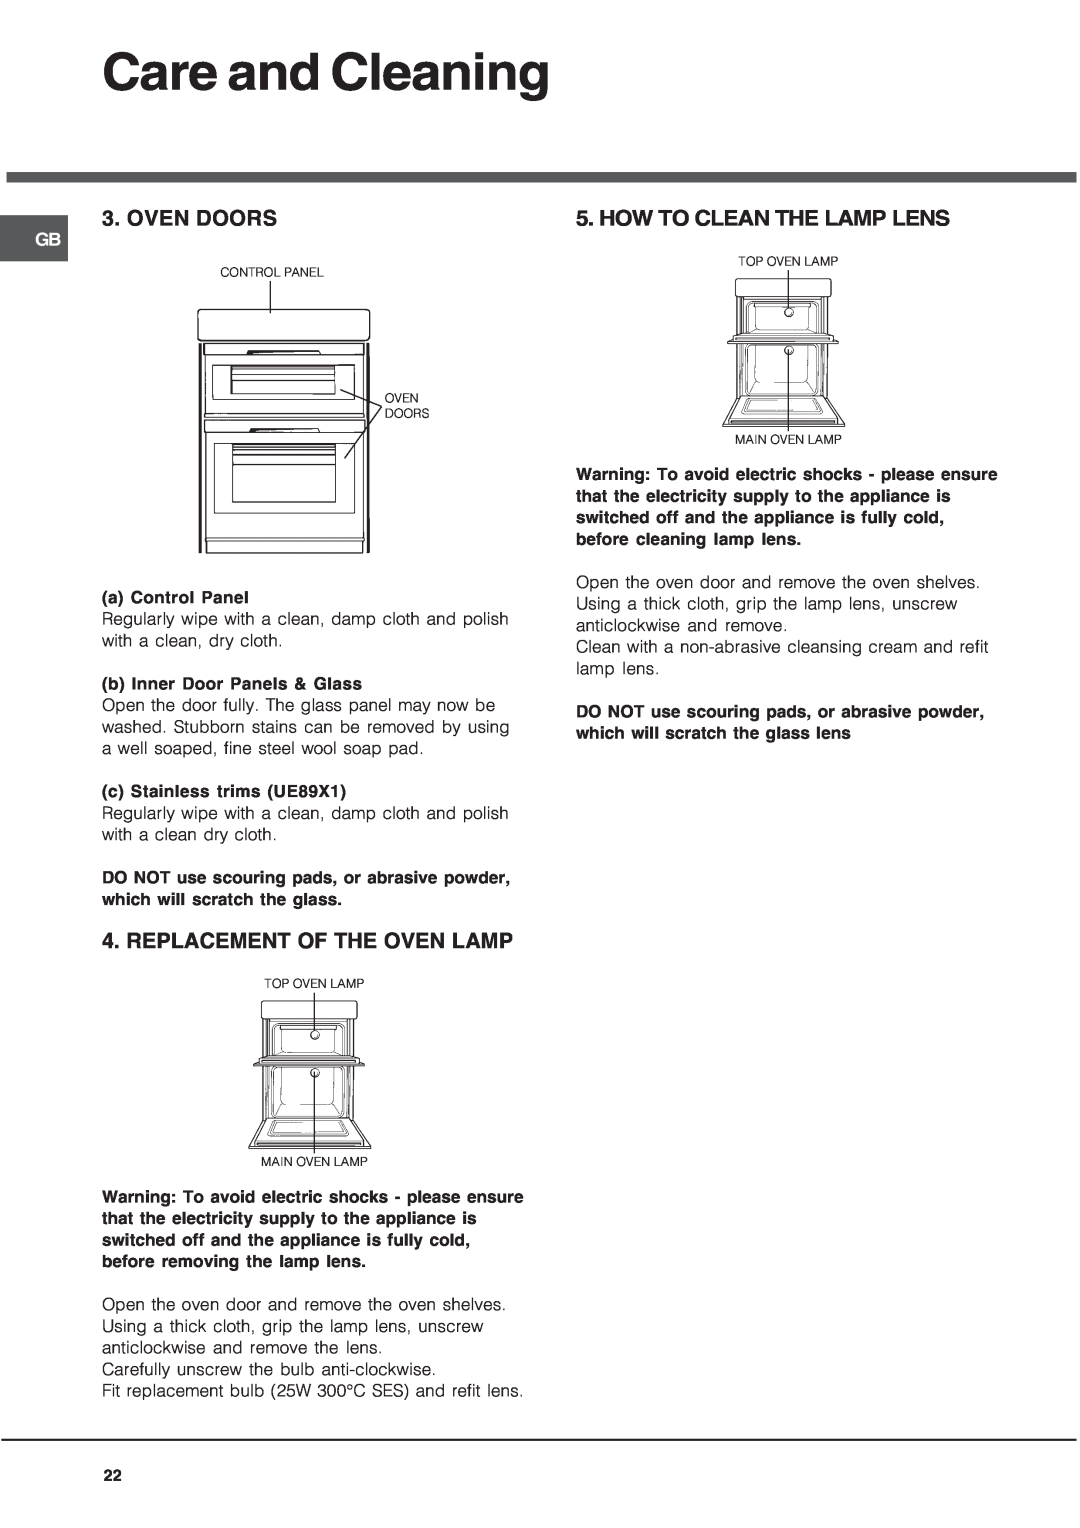 Hotpoint UQ891 manual Care and Cleaning, Oven Doors, Replacement Of The Oven Lamp, How To Clean The Lamp Lens 